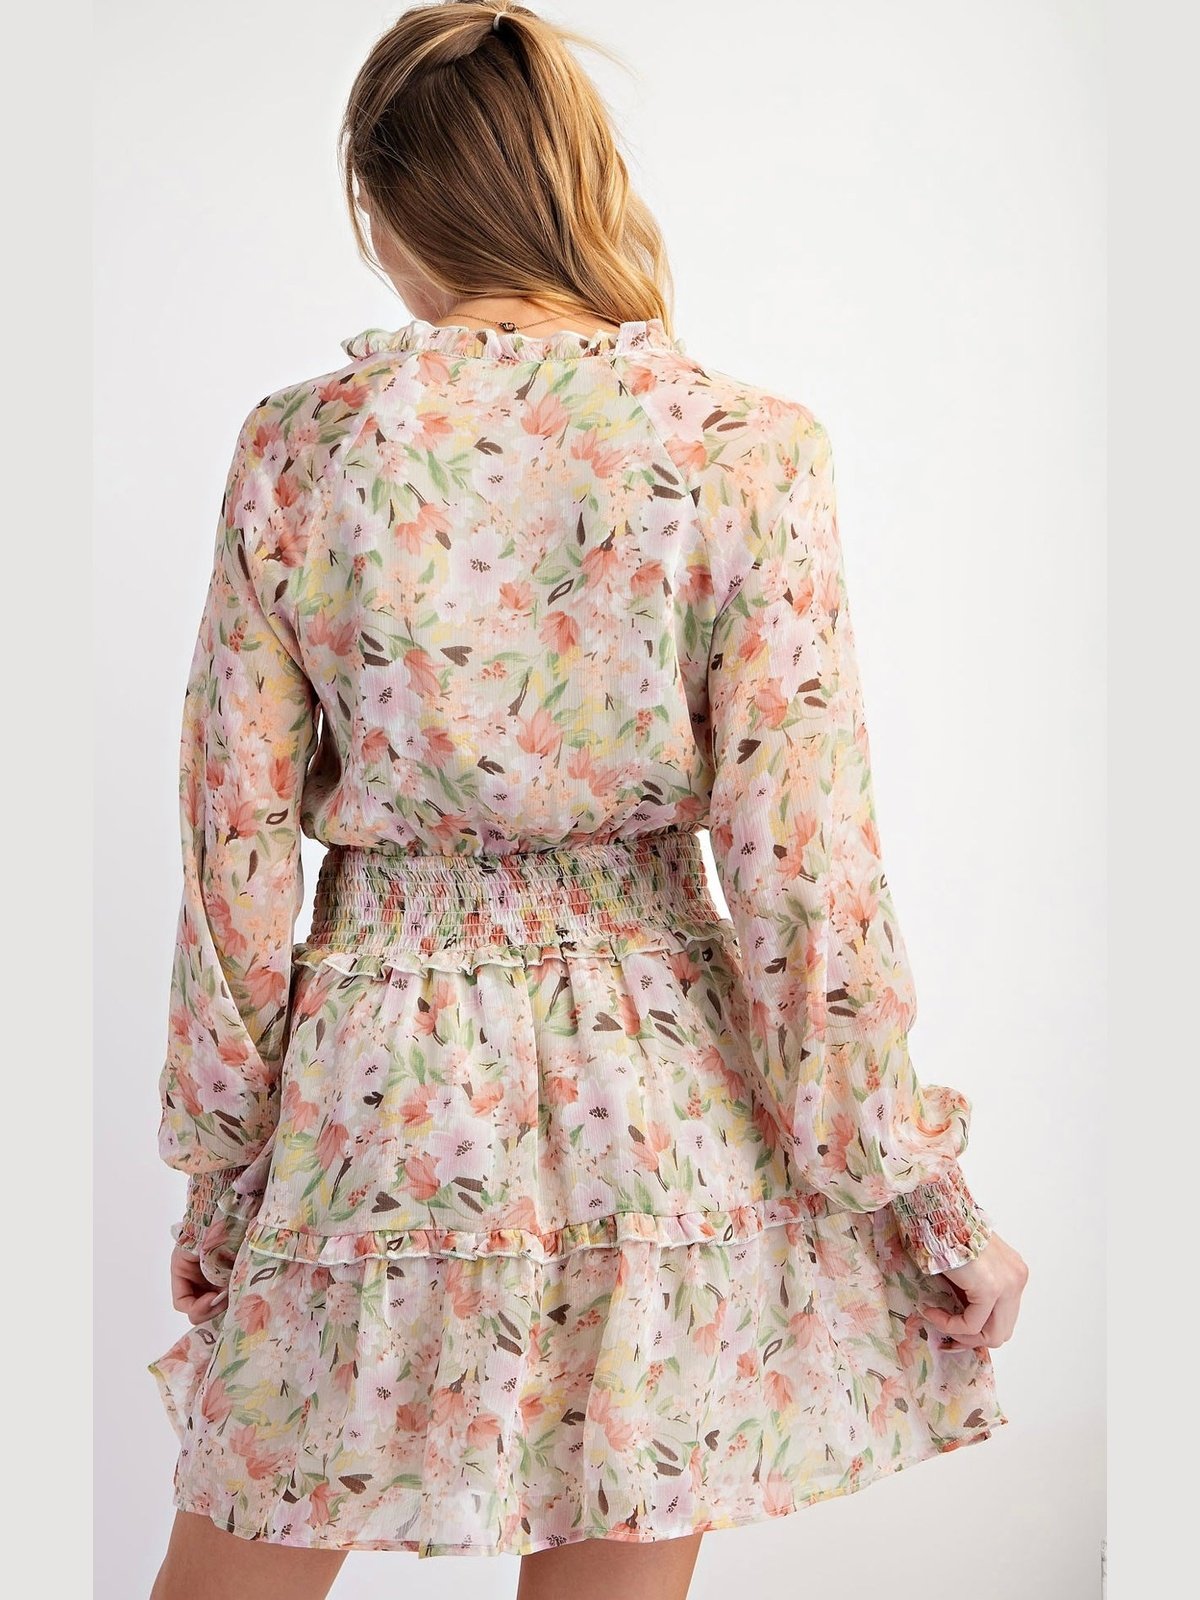 Floral Delight Silky Floral Ruffled Dress